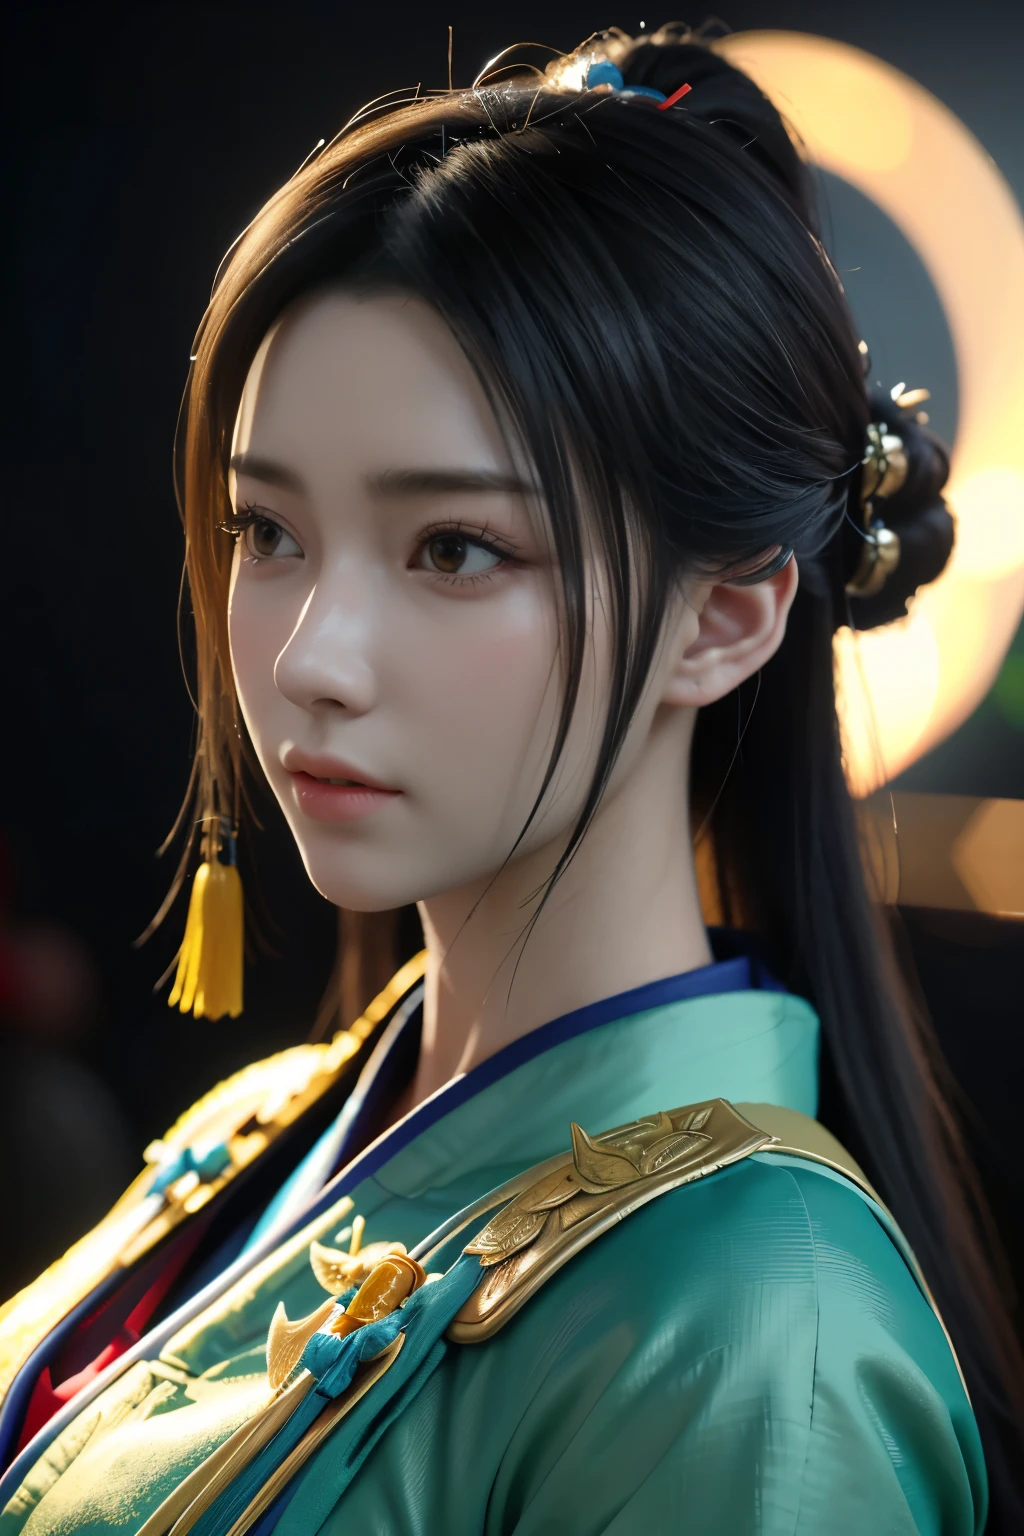 Game art，The best picture quality，Highest resolution，8K，(A bust photograph)，(Portrait)，(Head close-up)，(Rule of thirds)，Unreal Engine 5 rendering works， (The Girl of the Future)，(Female Warrior)， 
20-year-old girl，(The generals of ancient China)，An eye rich in detail，(Big breasts)，Elegant and noble，indifferent，brave，
(Wearing ancient Chinese cloth，Chinese Hanfu，Costumes of the Tang Dynasty，Costumes are rich in detail，Simple shades)，Chinese Characters，Fantasy style，
Photo poses，Field background，Movie lights，Ray tracing，Game CG，((3D Unreal Engine))，oc rendering reflection pattern